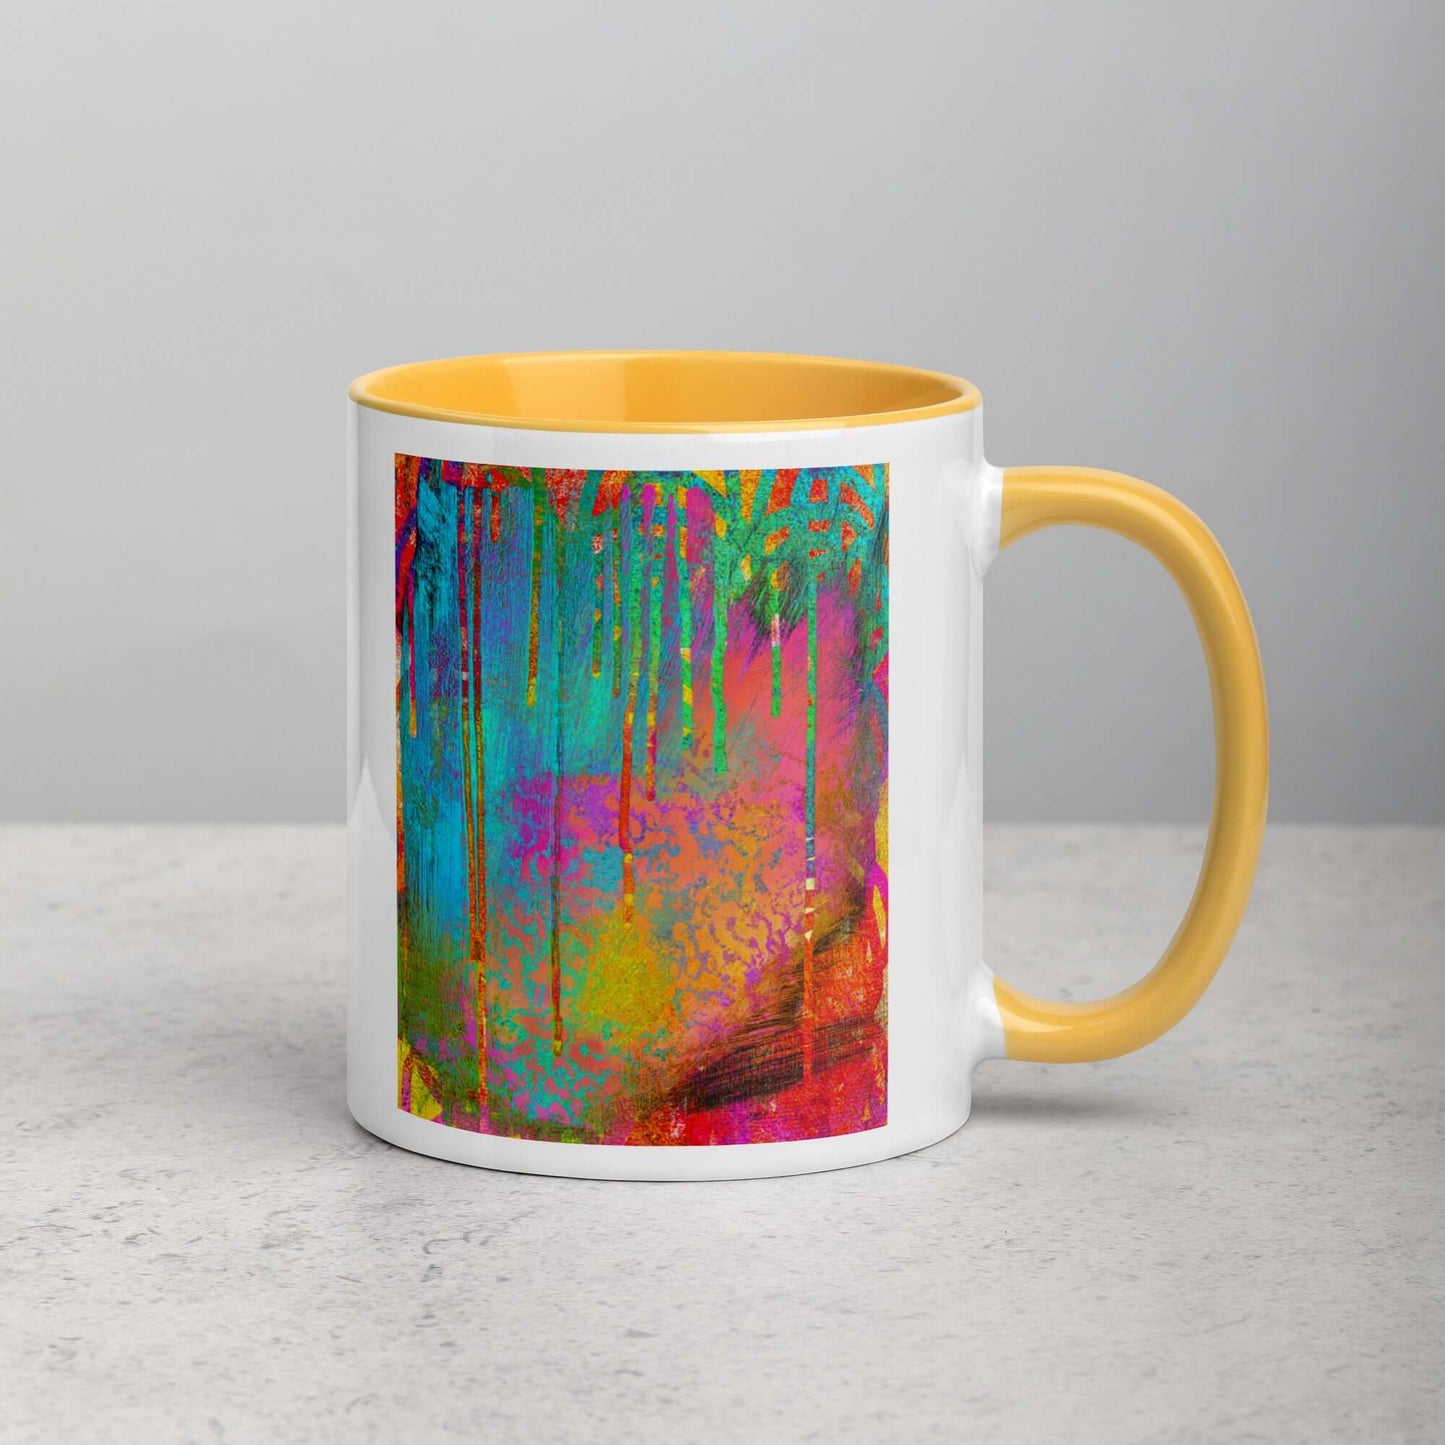 Paint Drips on Colorful Background “Into the Beyond” Abstract Art Mug with Golden Yellow Color Inside Right Handed Front View